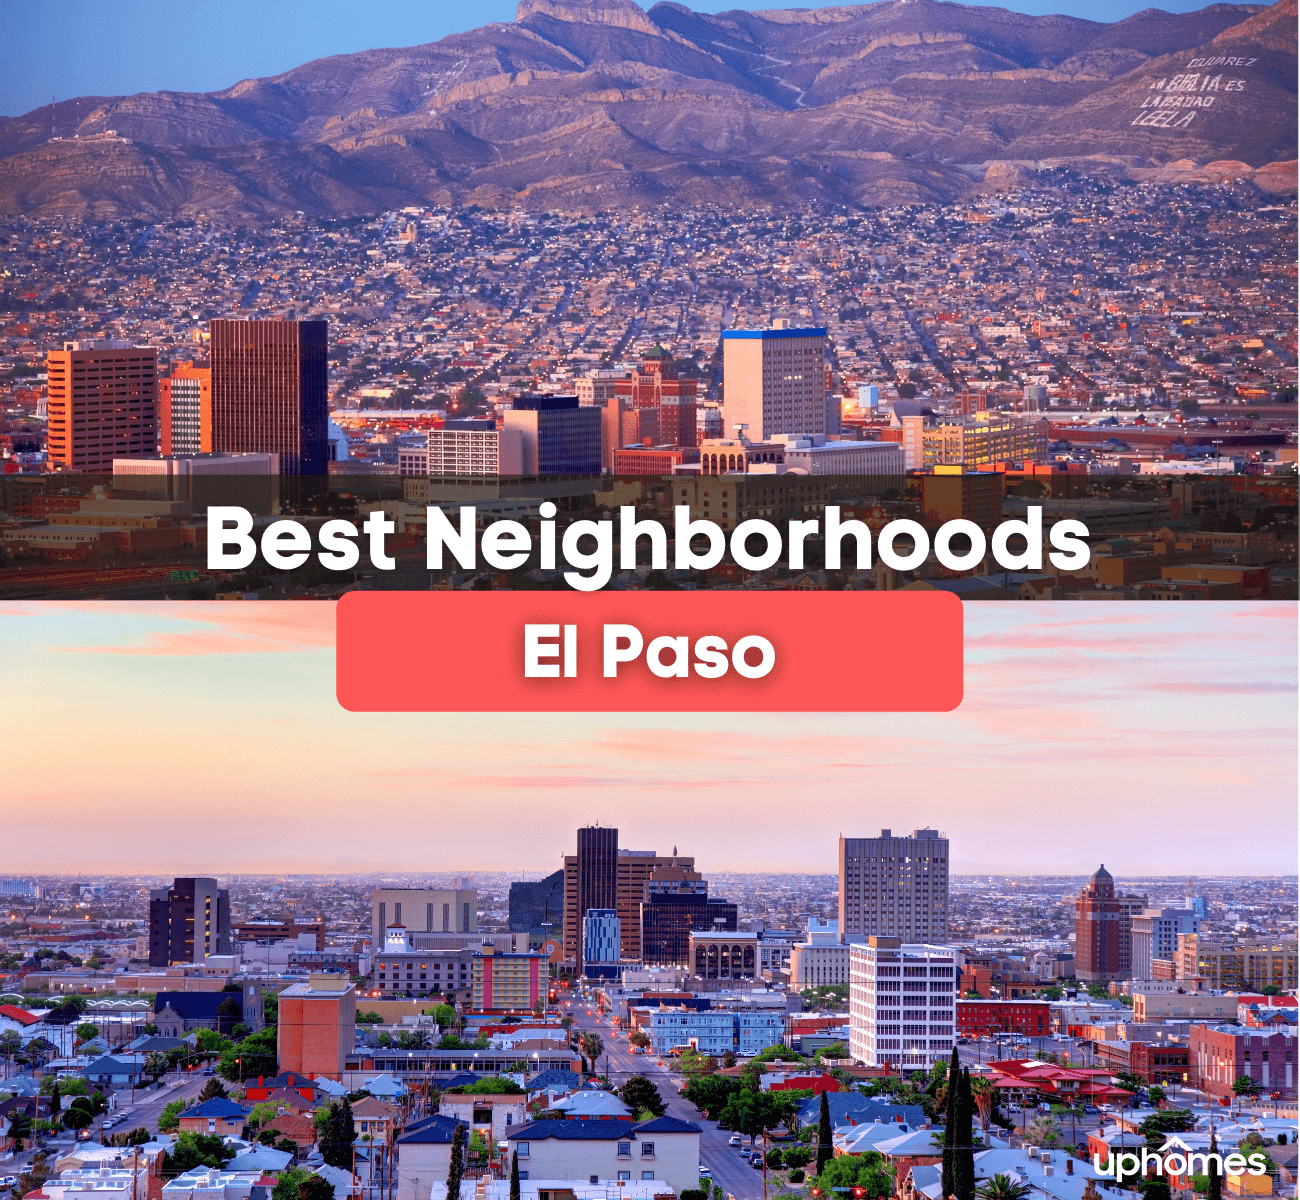 Best neighborhoods in El Paso, TX - What are the best places to live in El Paso Texas?